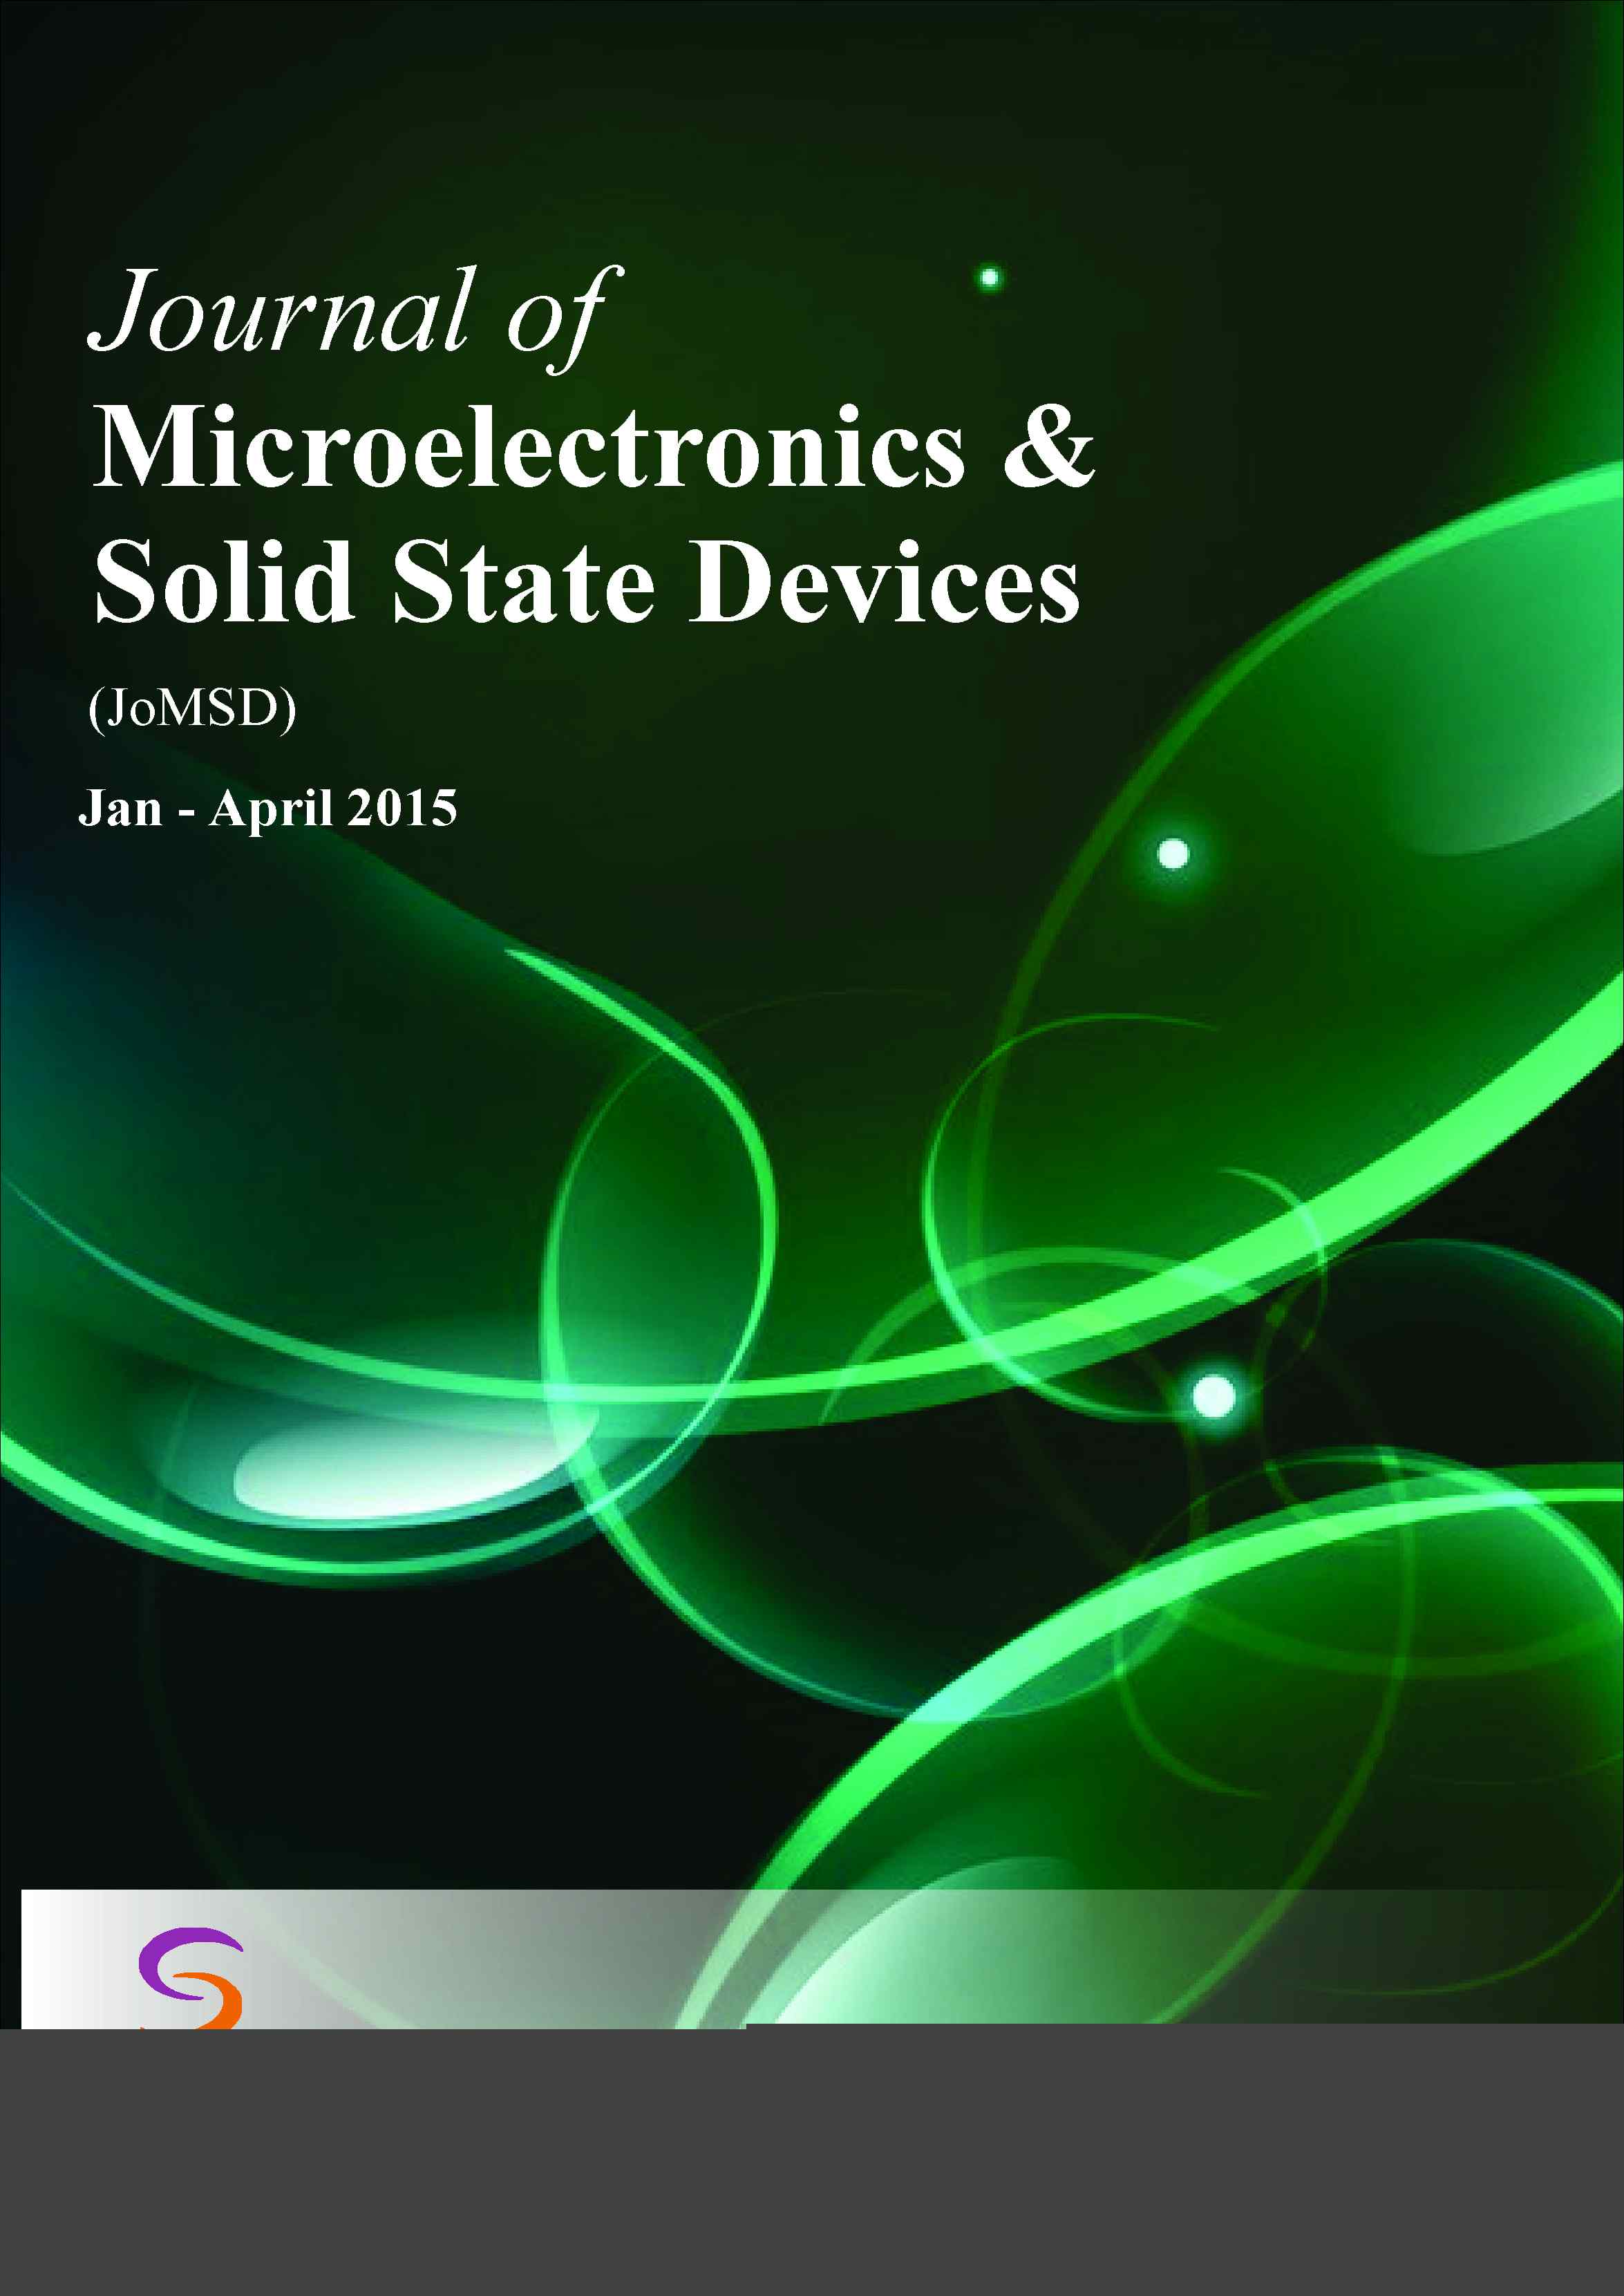 Journal of Microelectronics and Solid State Devices